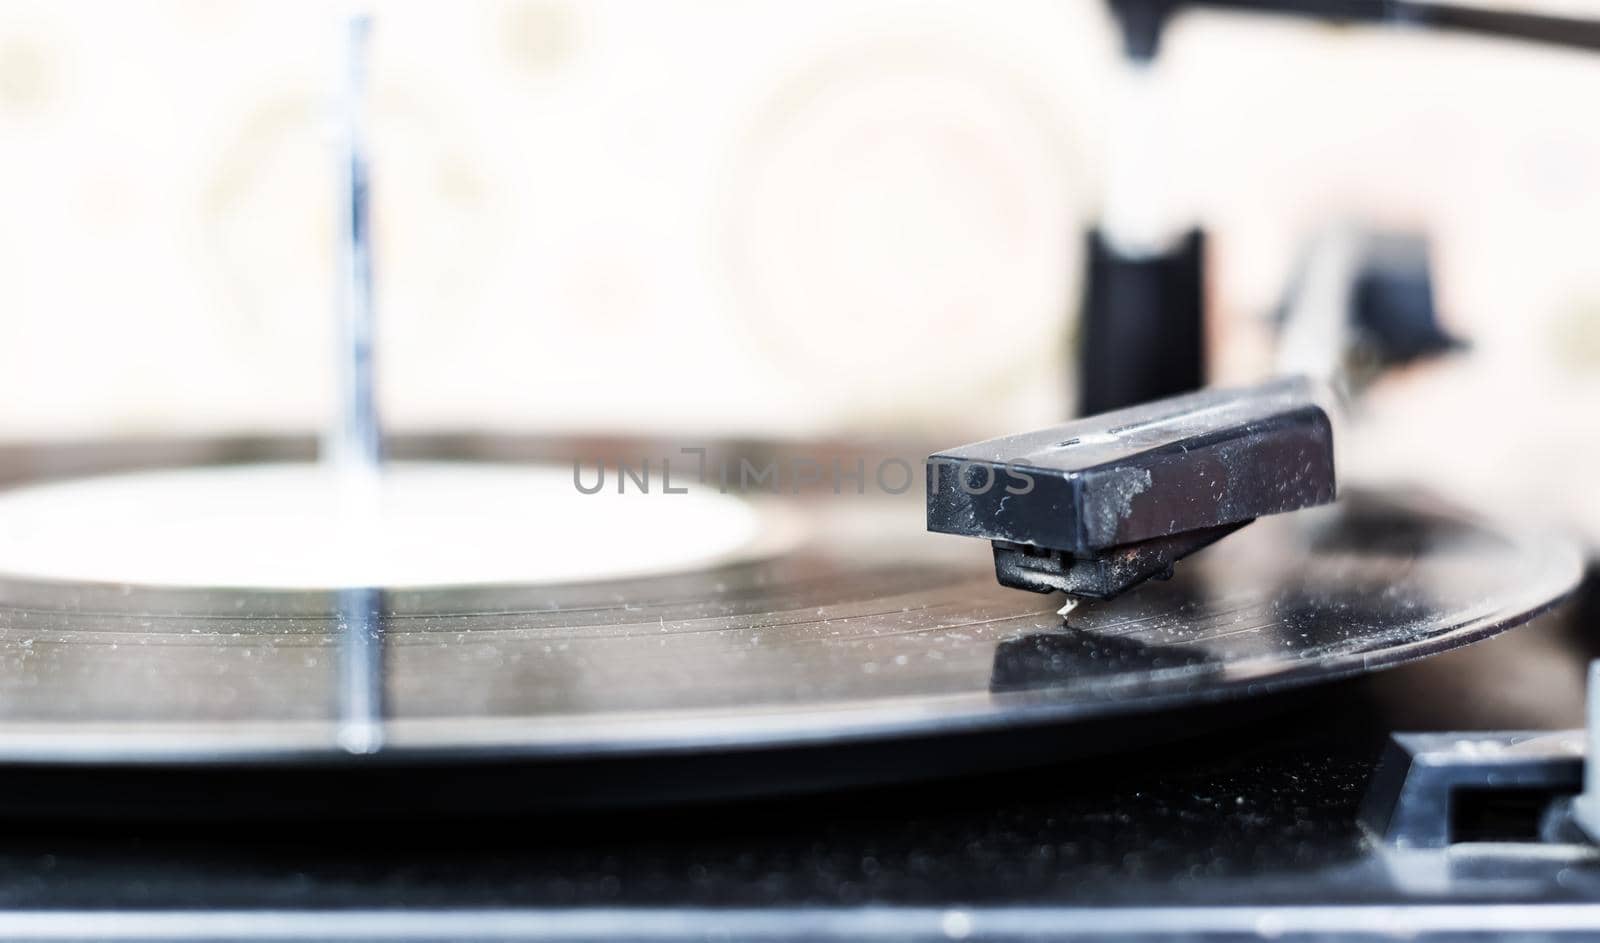 the needle of a turntable playing the tracks of a black vinyl record. by rarrarorro